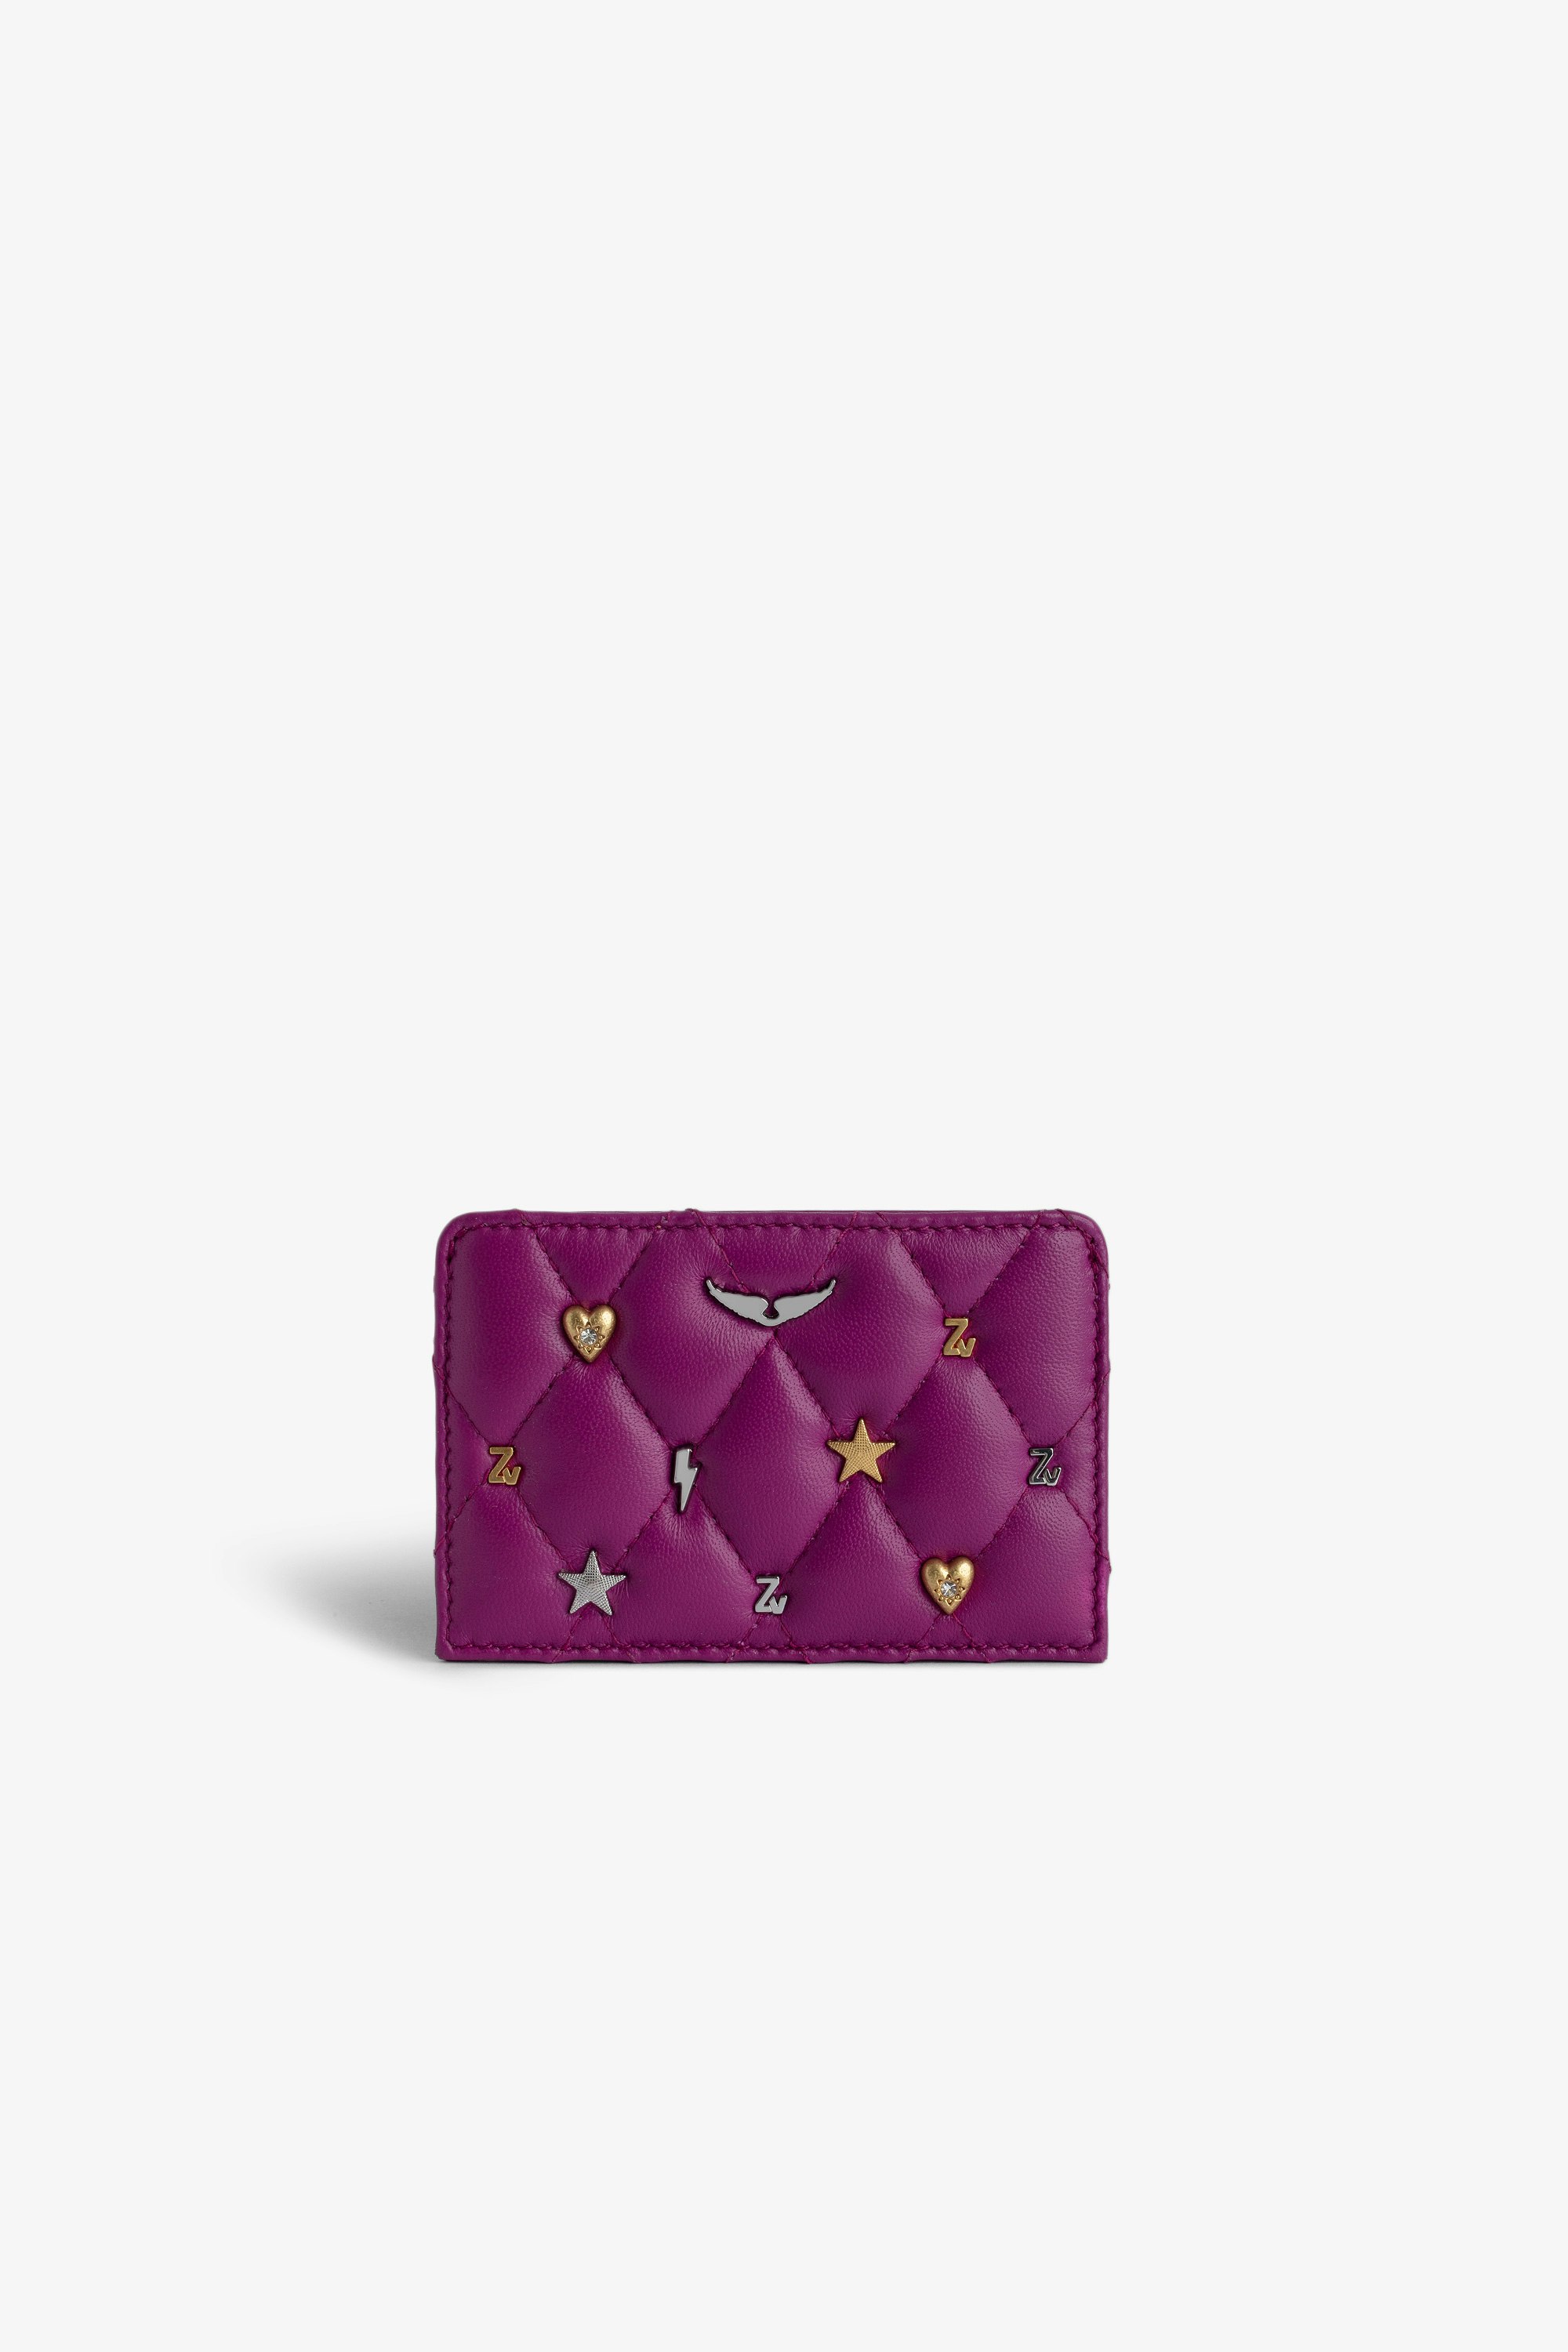 ZV Pass Card Holder - Fuchsia smooth and quilted leather card holder with wings charm and lucky charms.